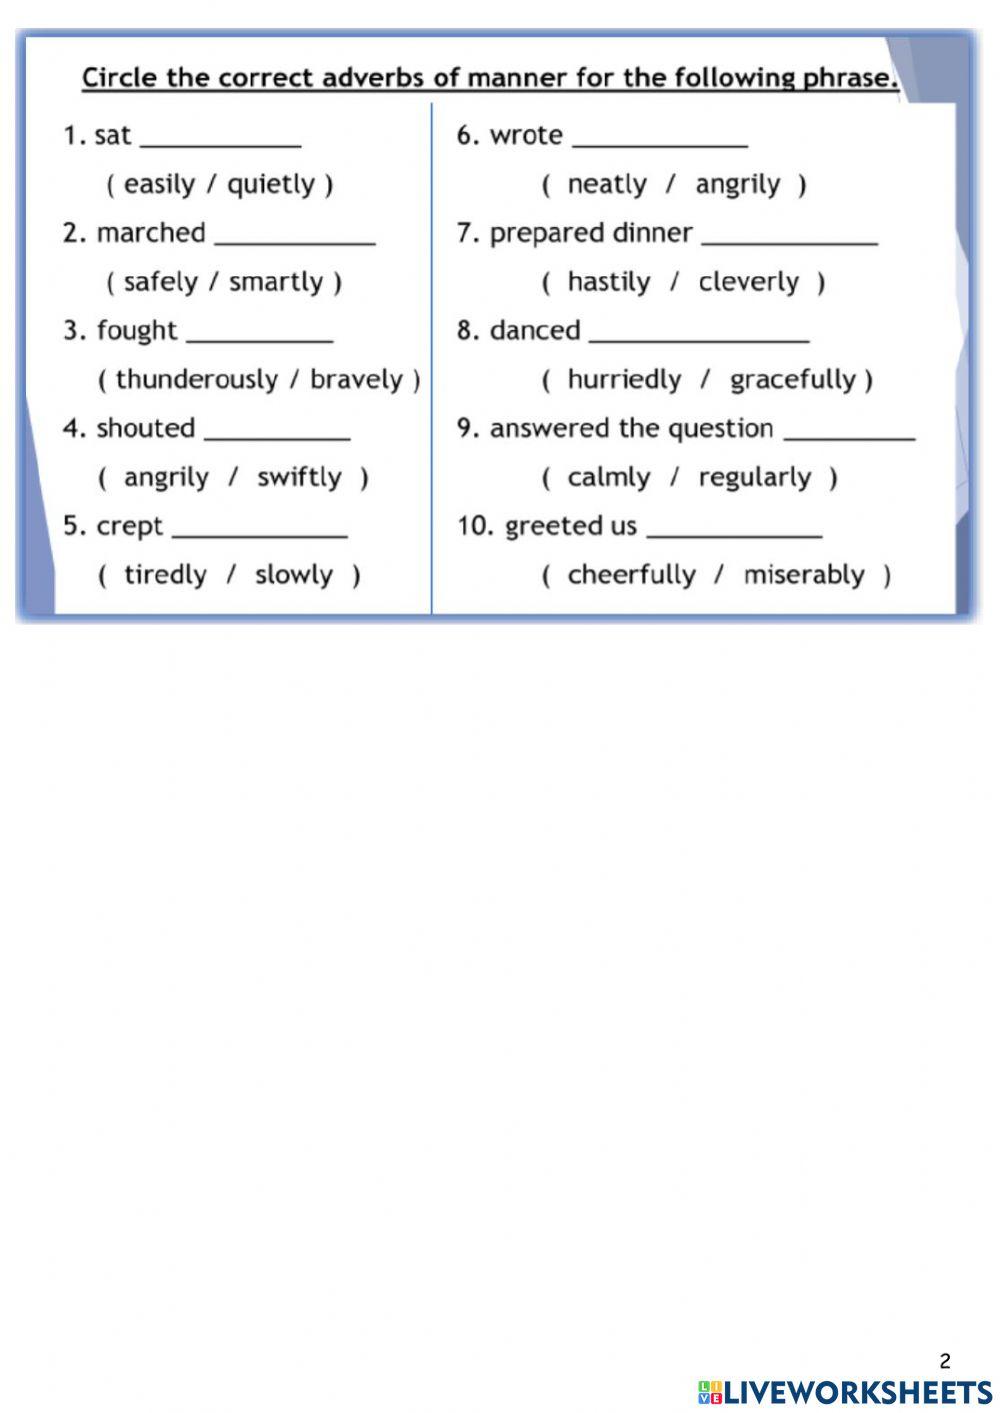 English - Adverbs of Manner